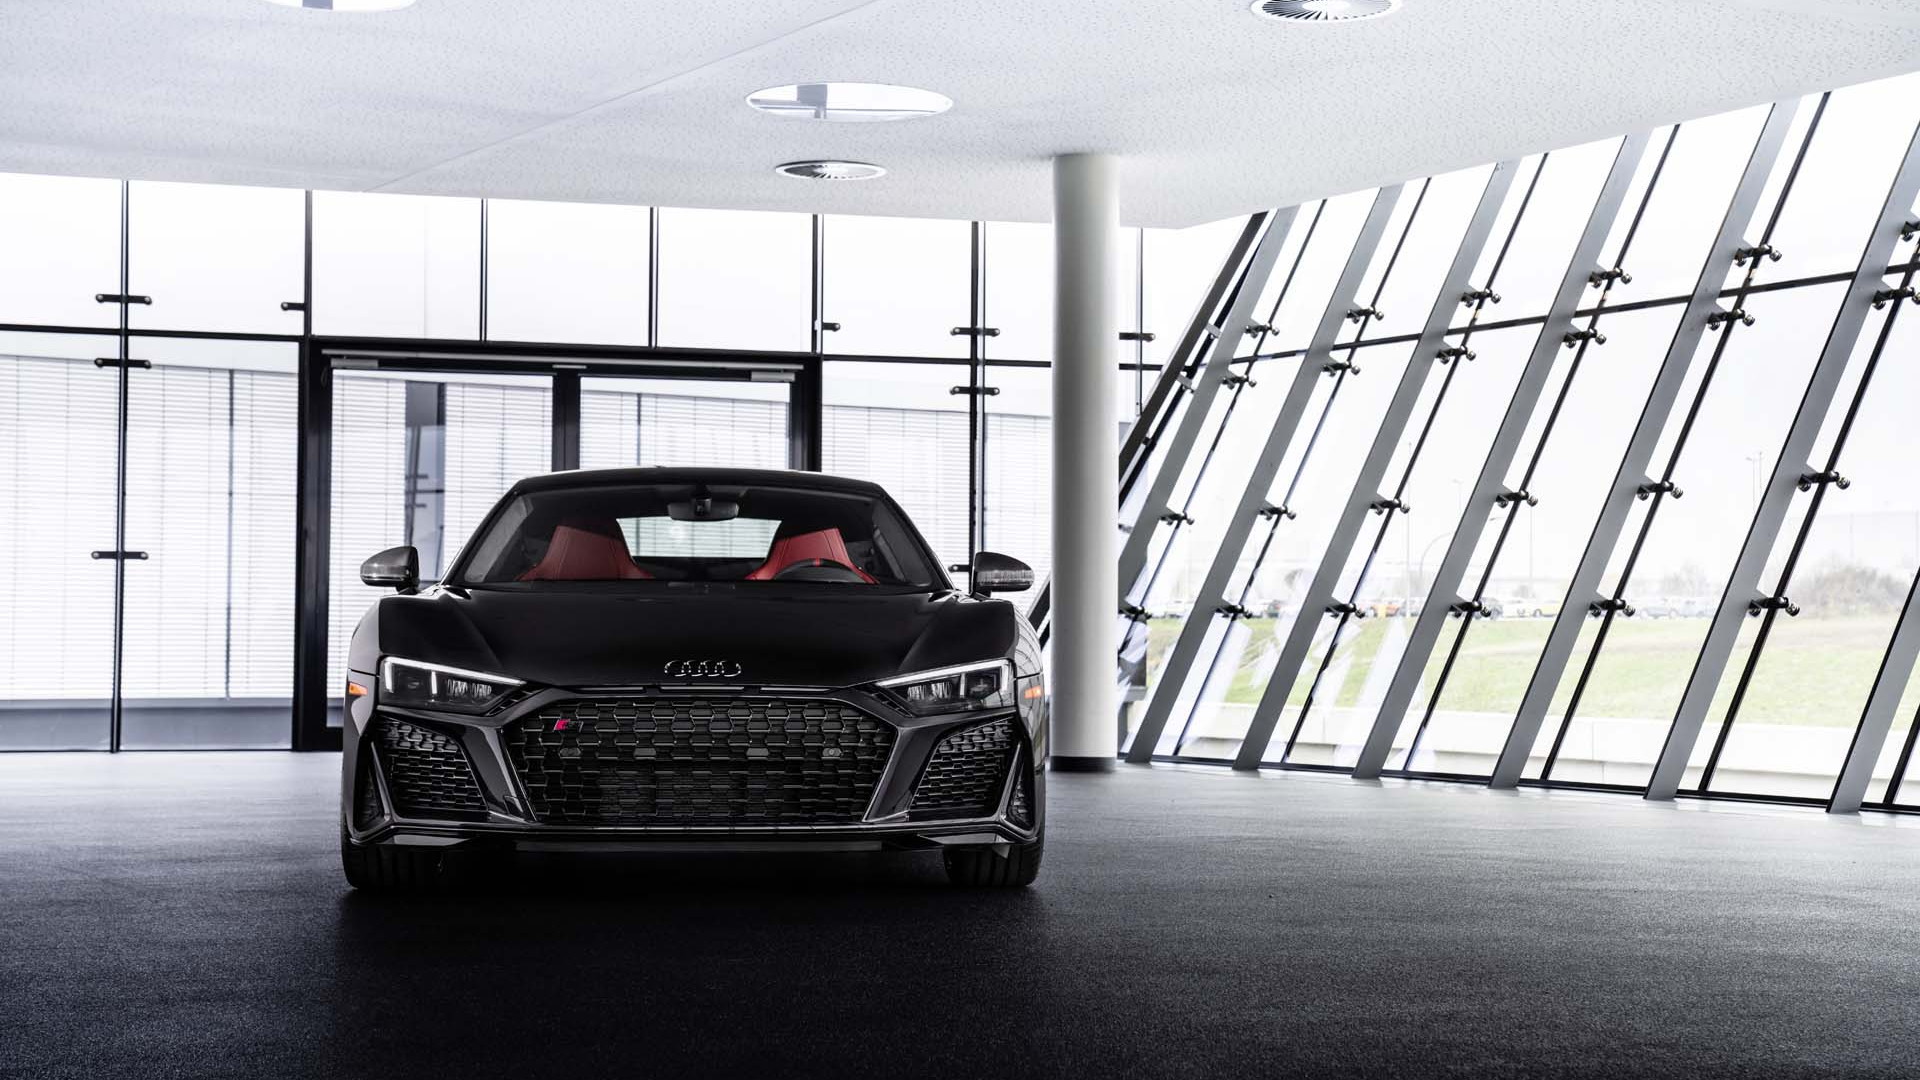 2021 Audi R8 V10 RWD Panther edition